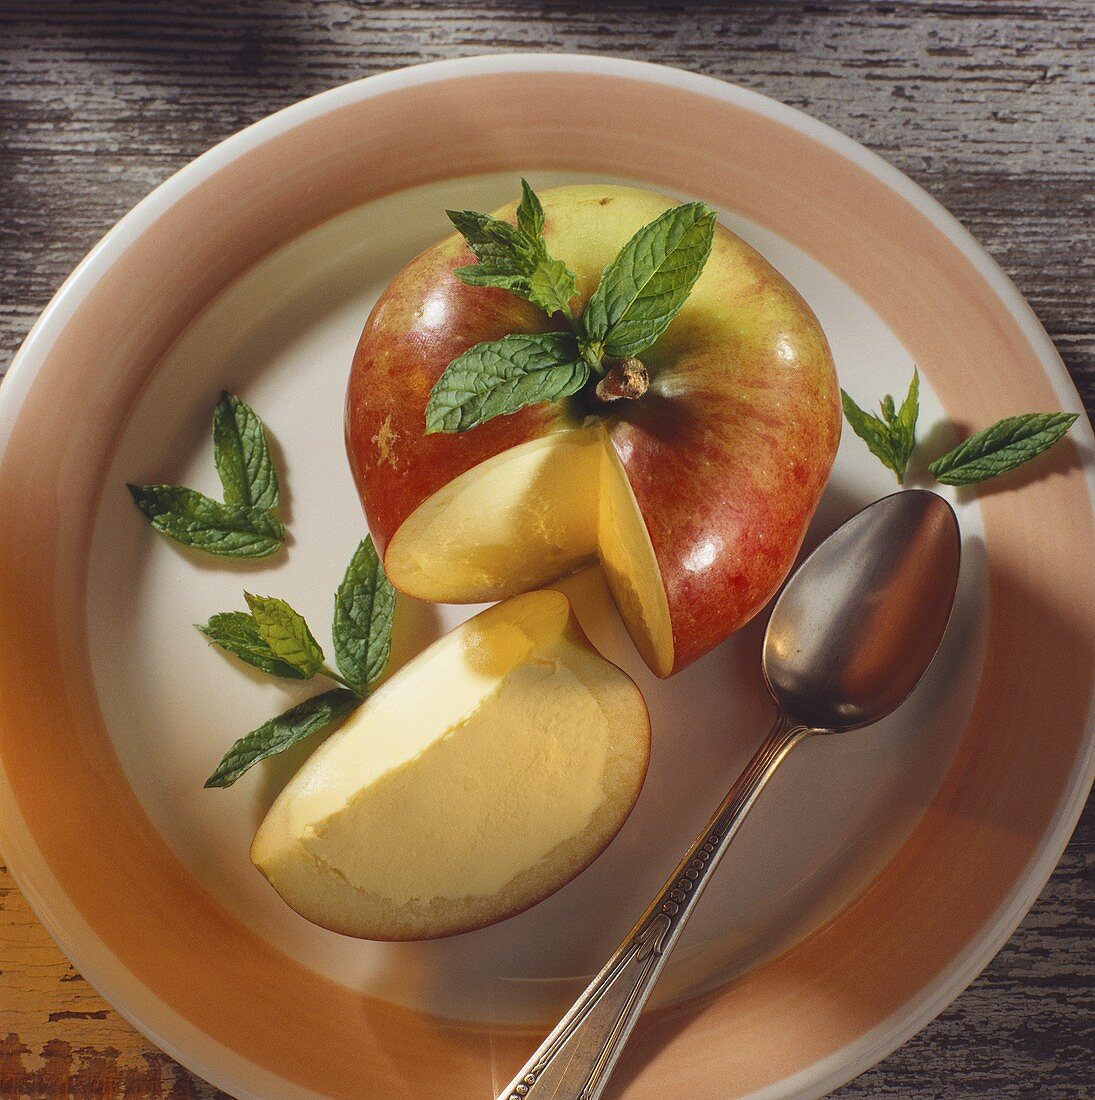 Apple filled with vanilla ice cream on plate, mint leaves